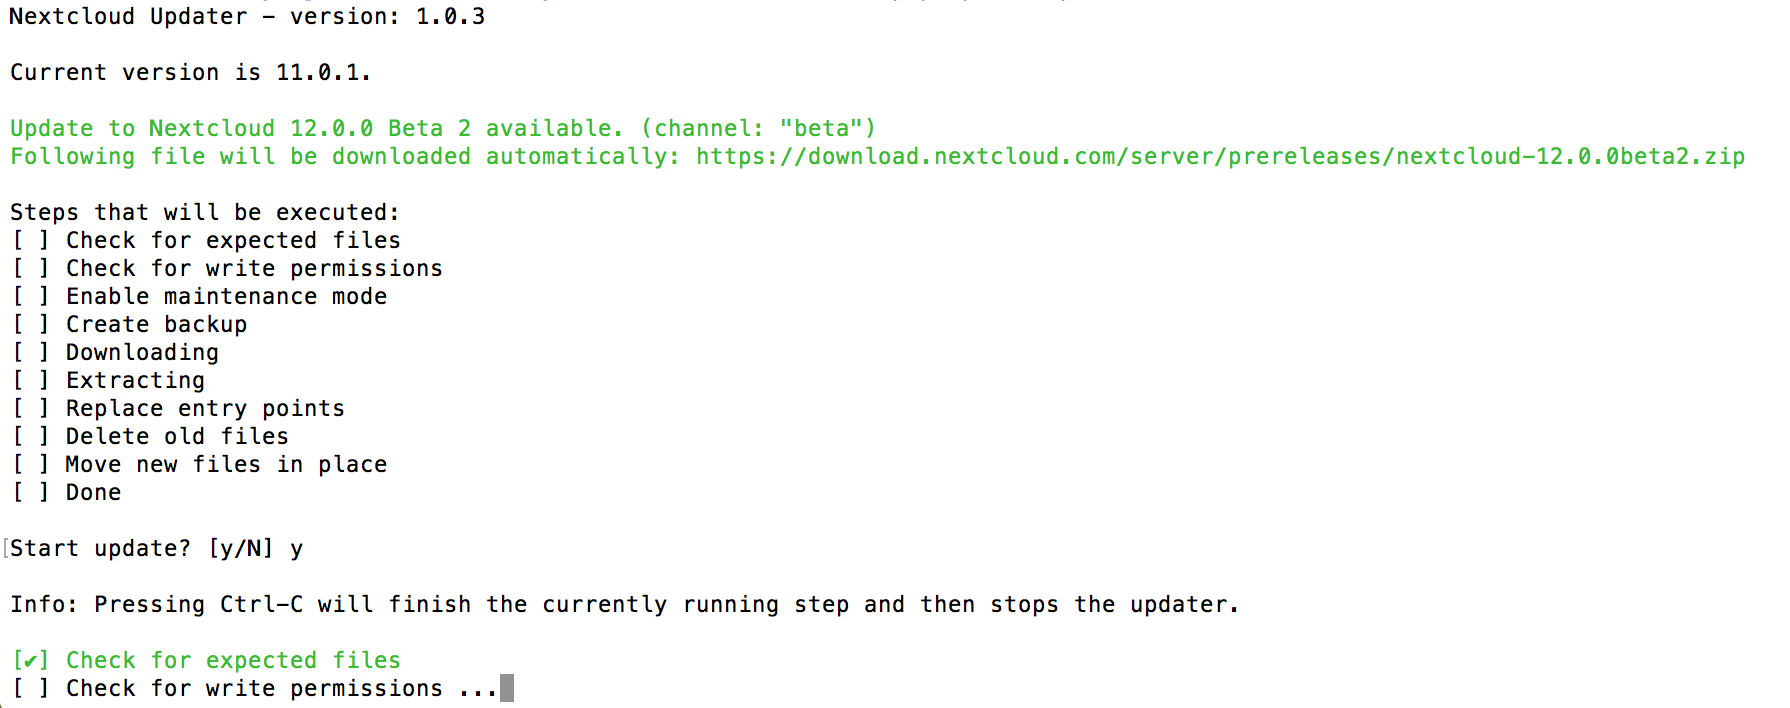 ../_images/updater-cli-3-running-step.png